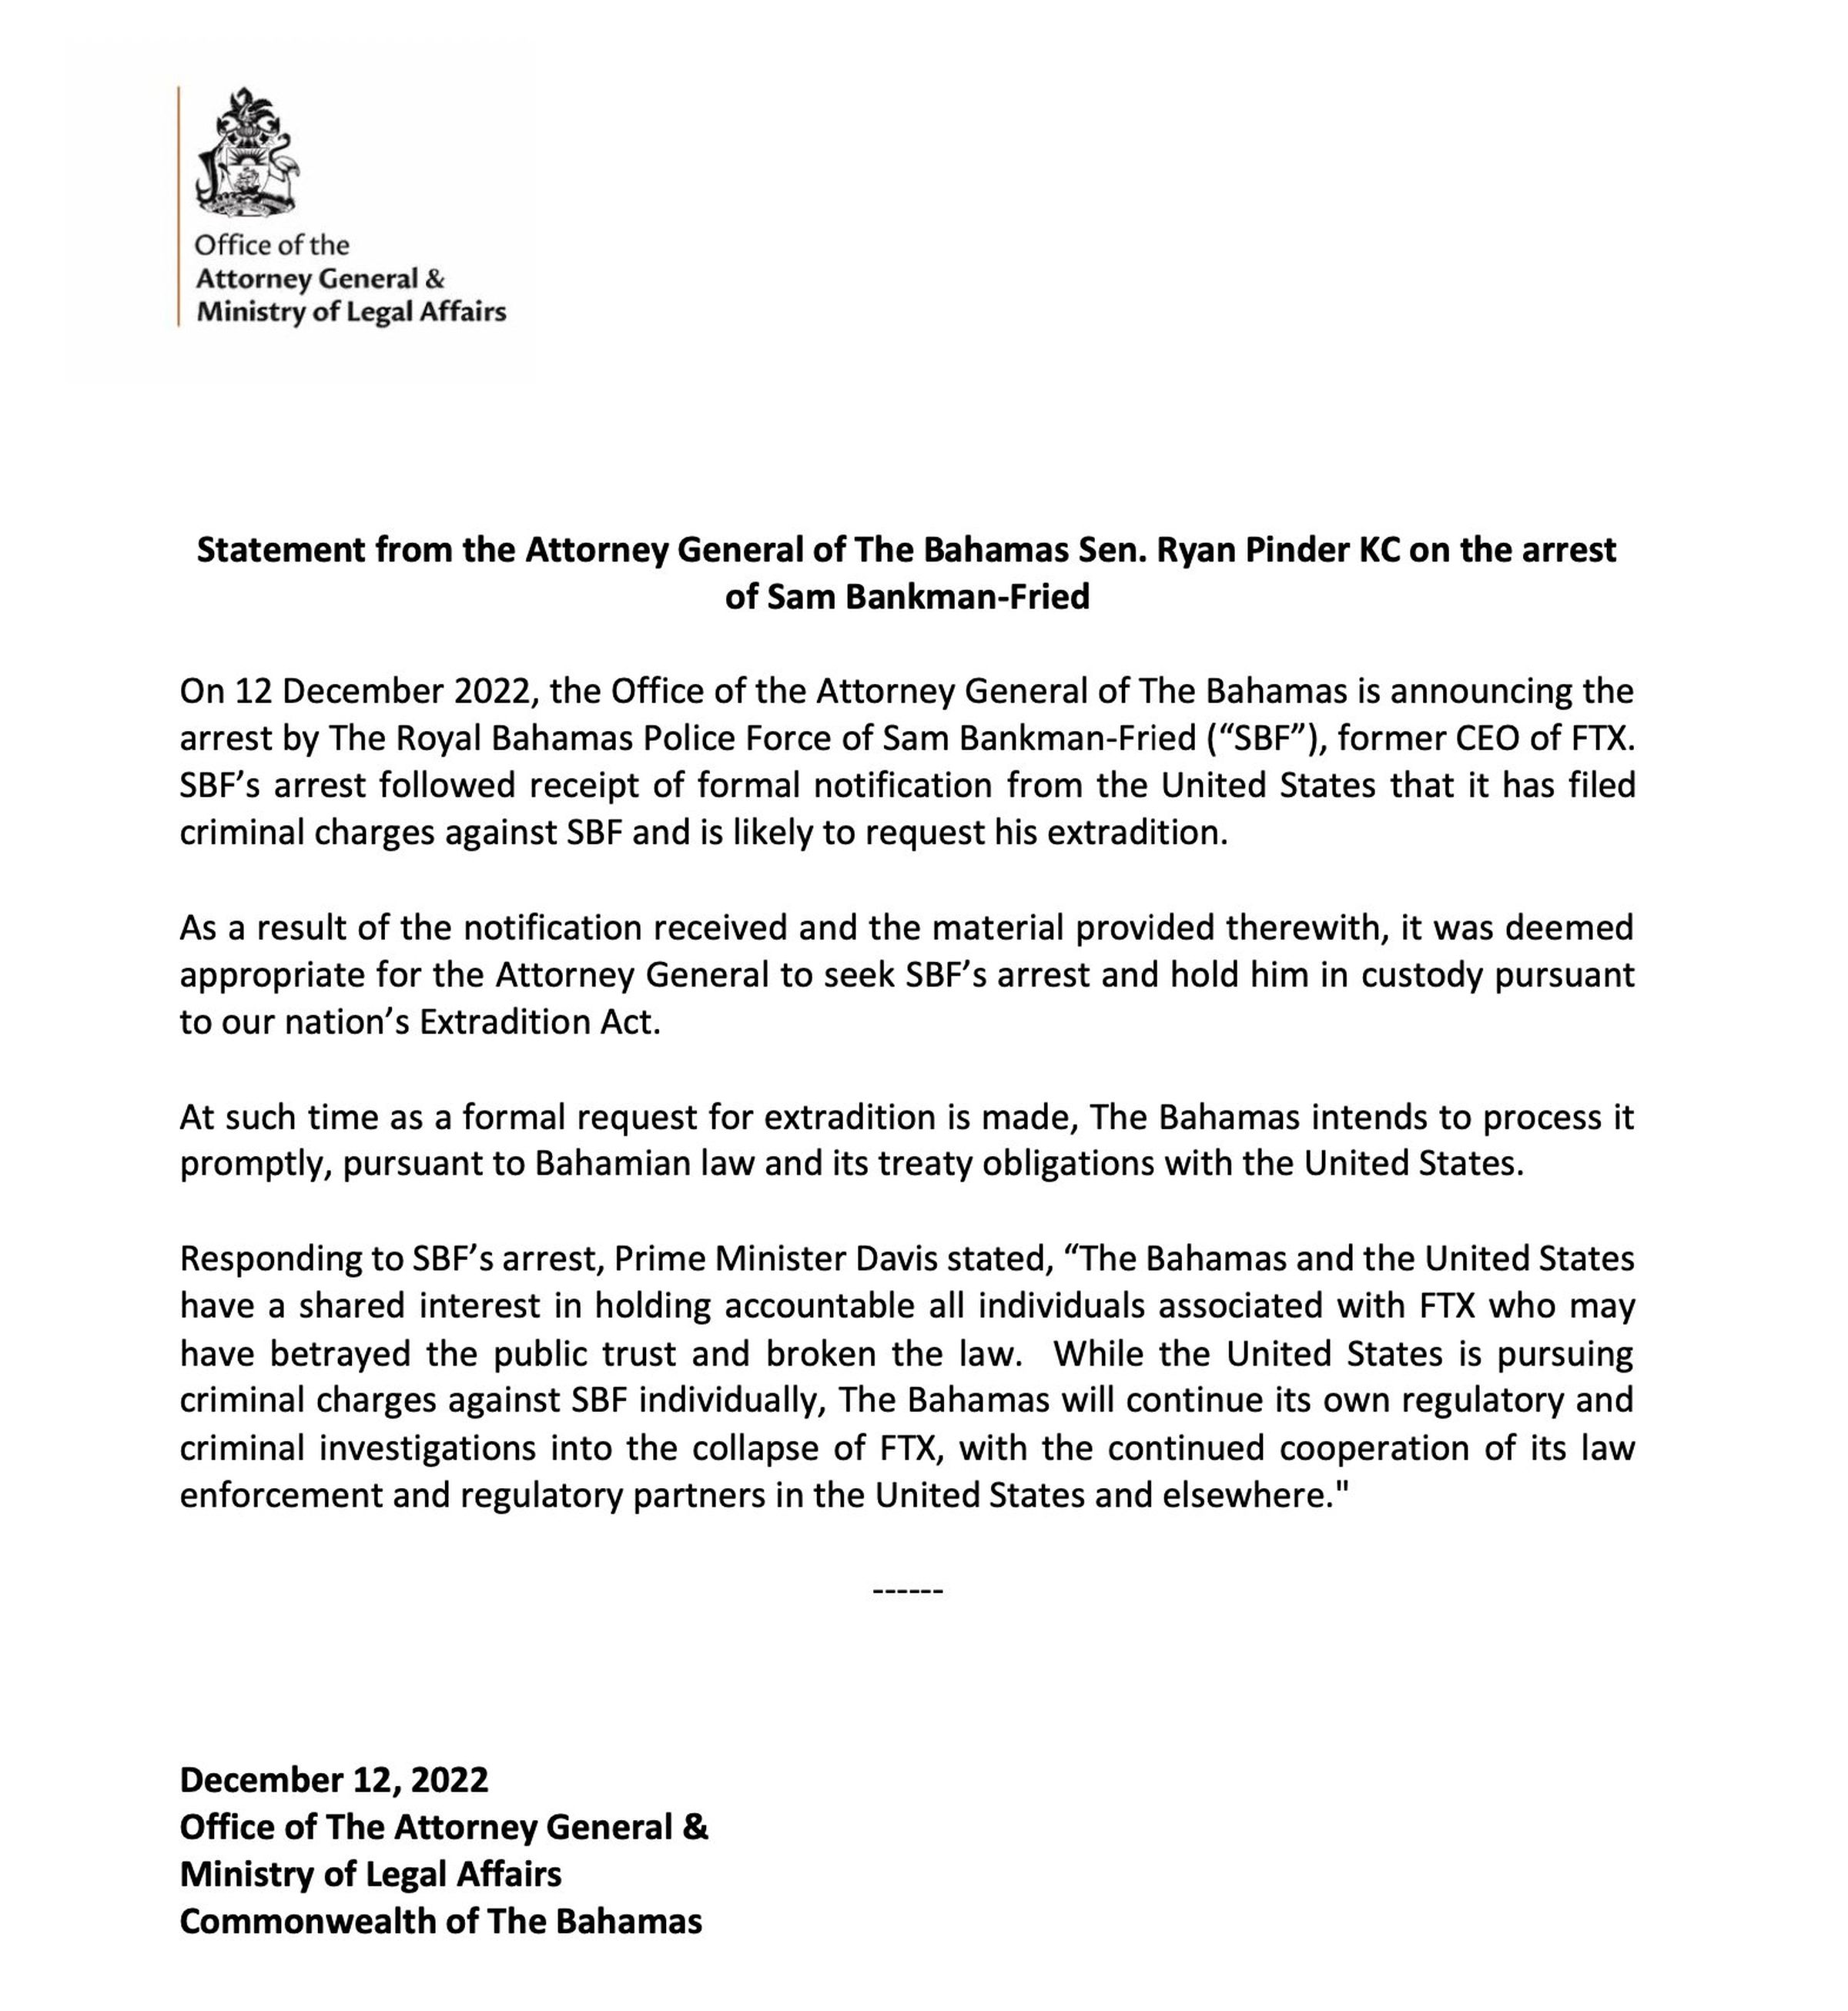 A statement from the Attorney General of the Bahamas confirming the arrest of FTX co-founder and former CEO Sam Bankman-Fried, pending his likely extradition to the United States to face criminal charges.